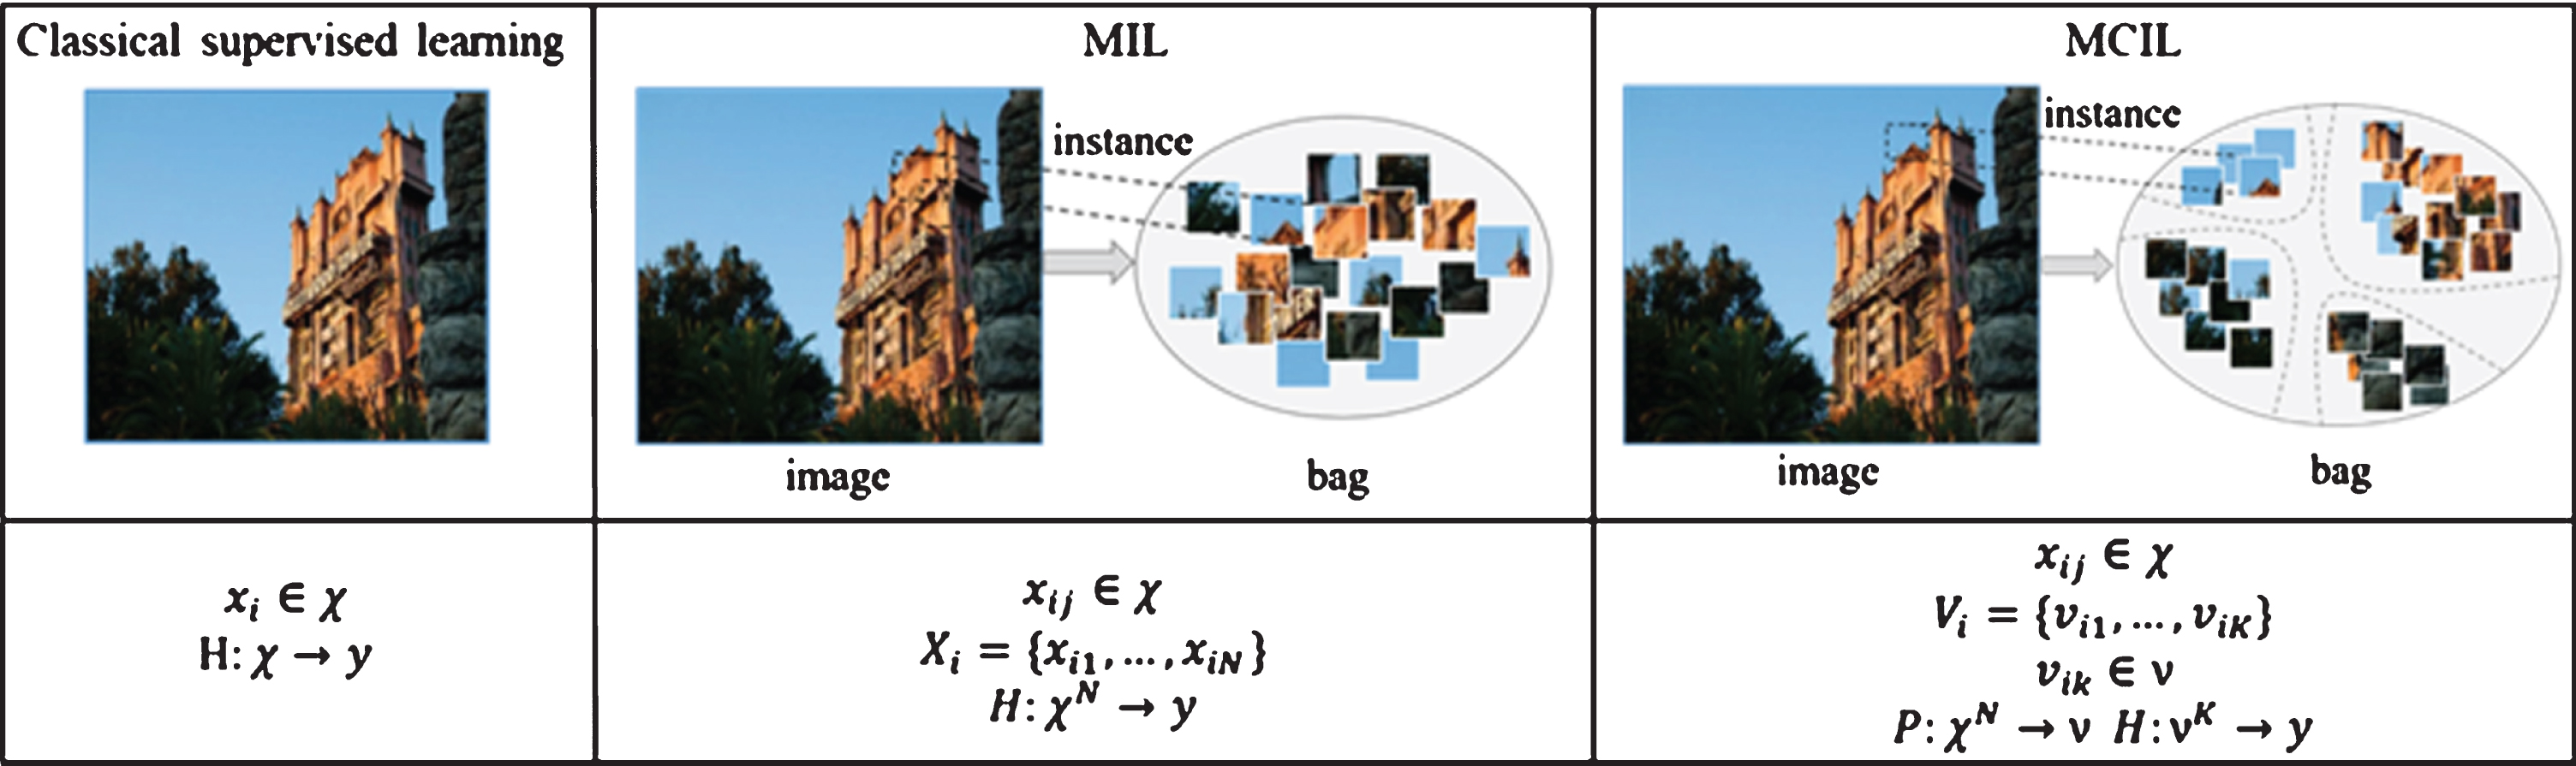 Distinct problem formulations and learning goals among classical supervised learning, MIL, and MCIL.